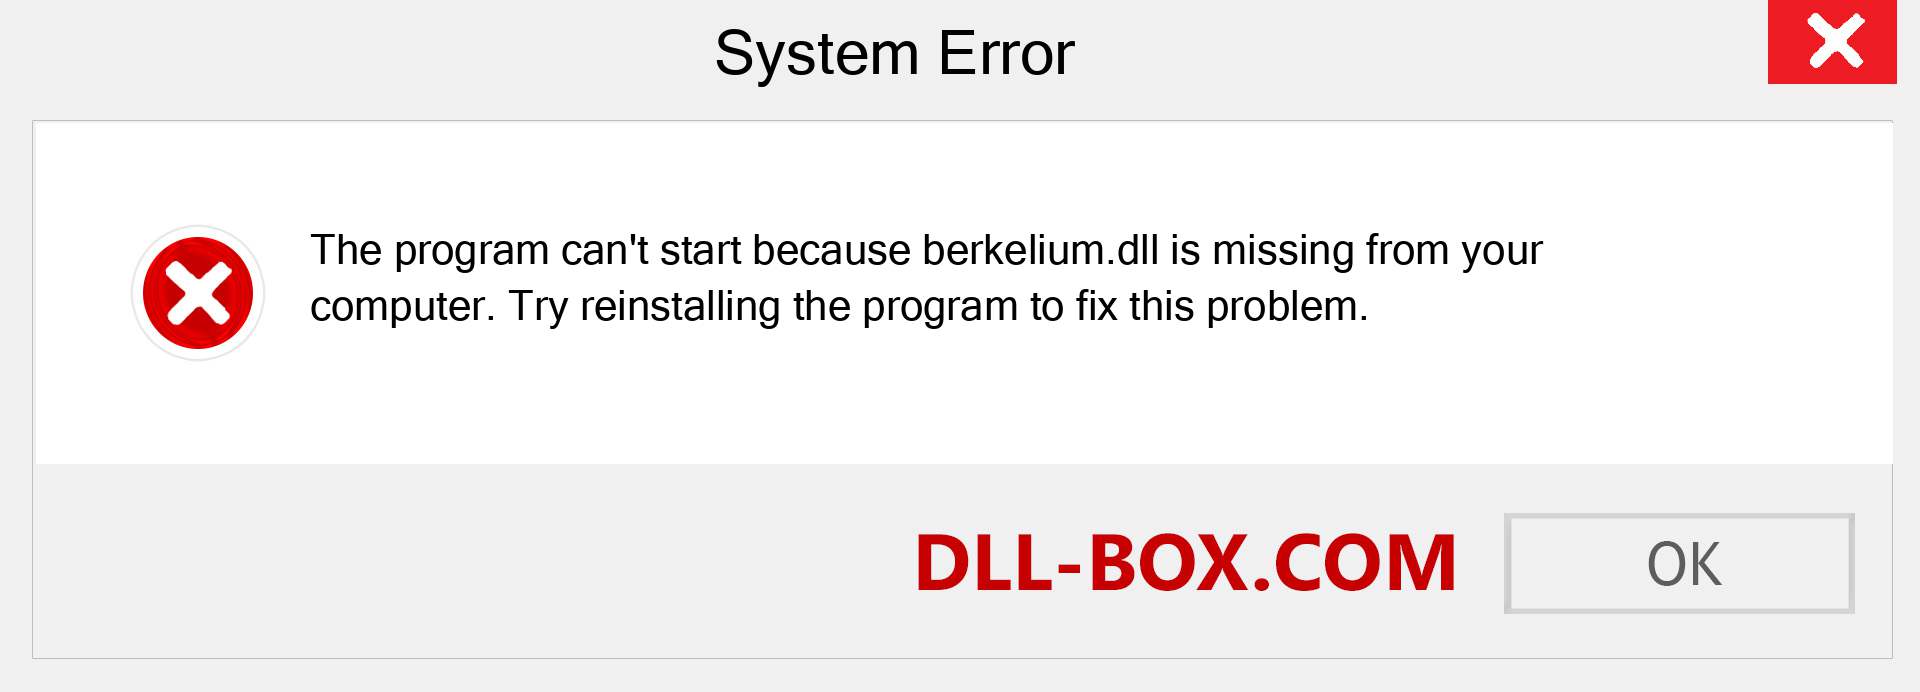  berkelium.dll file is missing?. Download for Windows 7, 8, 10 - Fix  berkelium dll Missing Error on Windows, photos, images